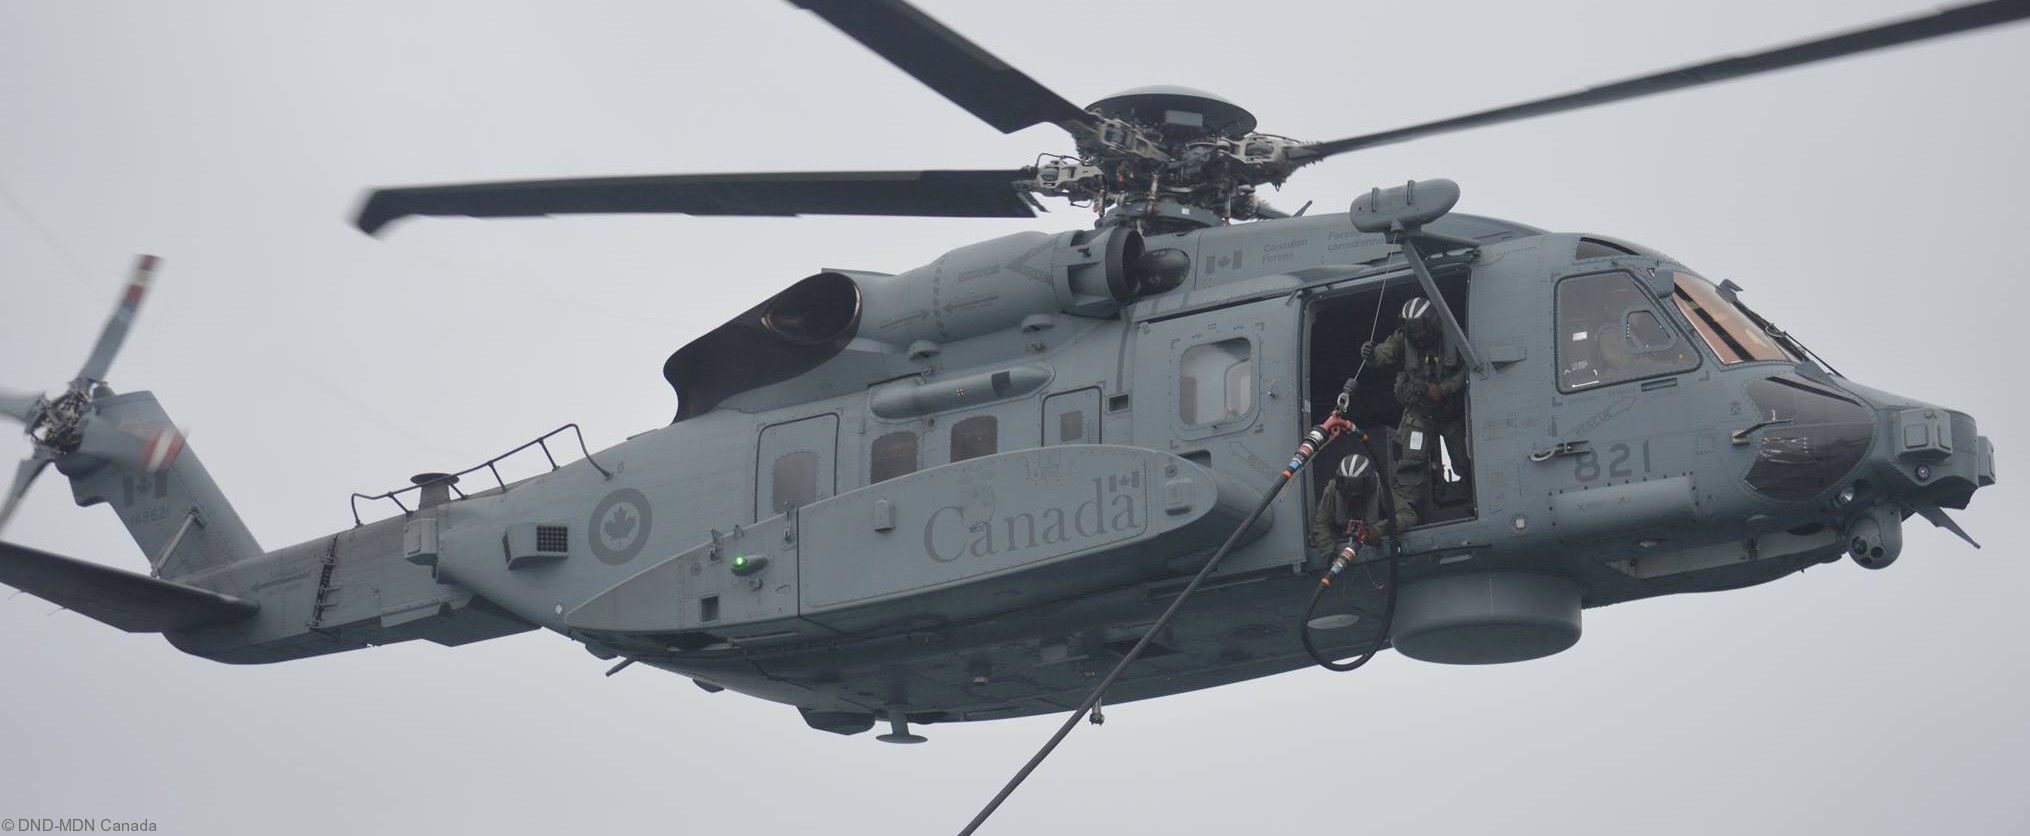 ch-148 cyclone naval helicopter royal canadian air force navy rcaf sikorsky hmcs 406 423 443 maritime squadron 36